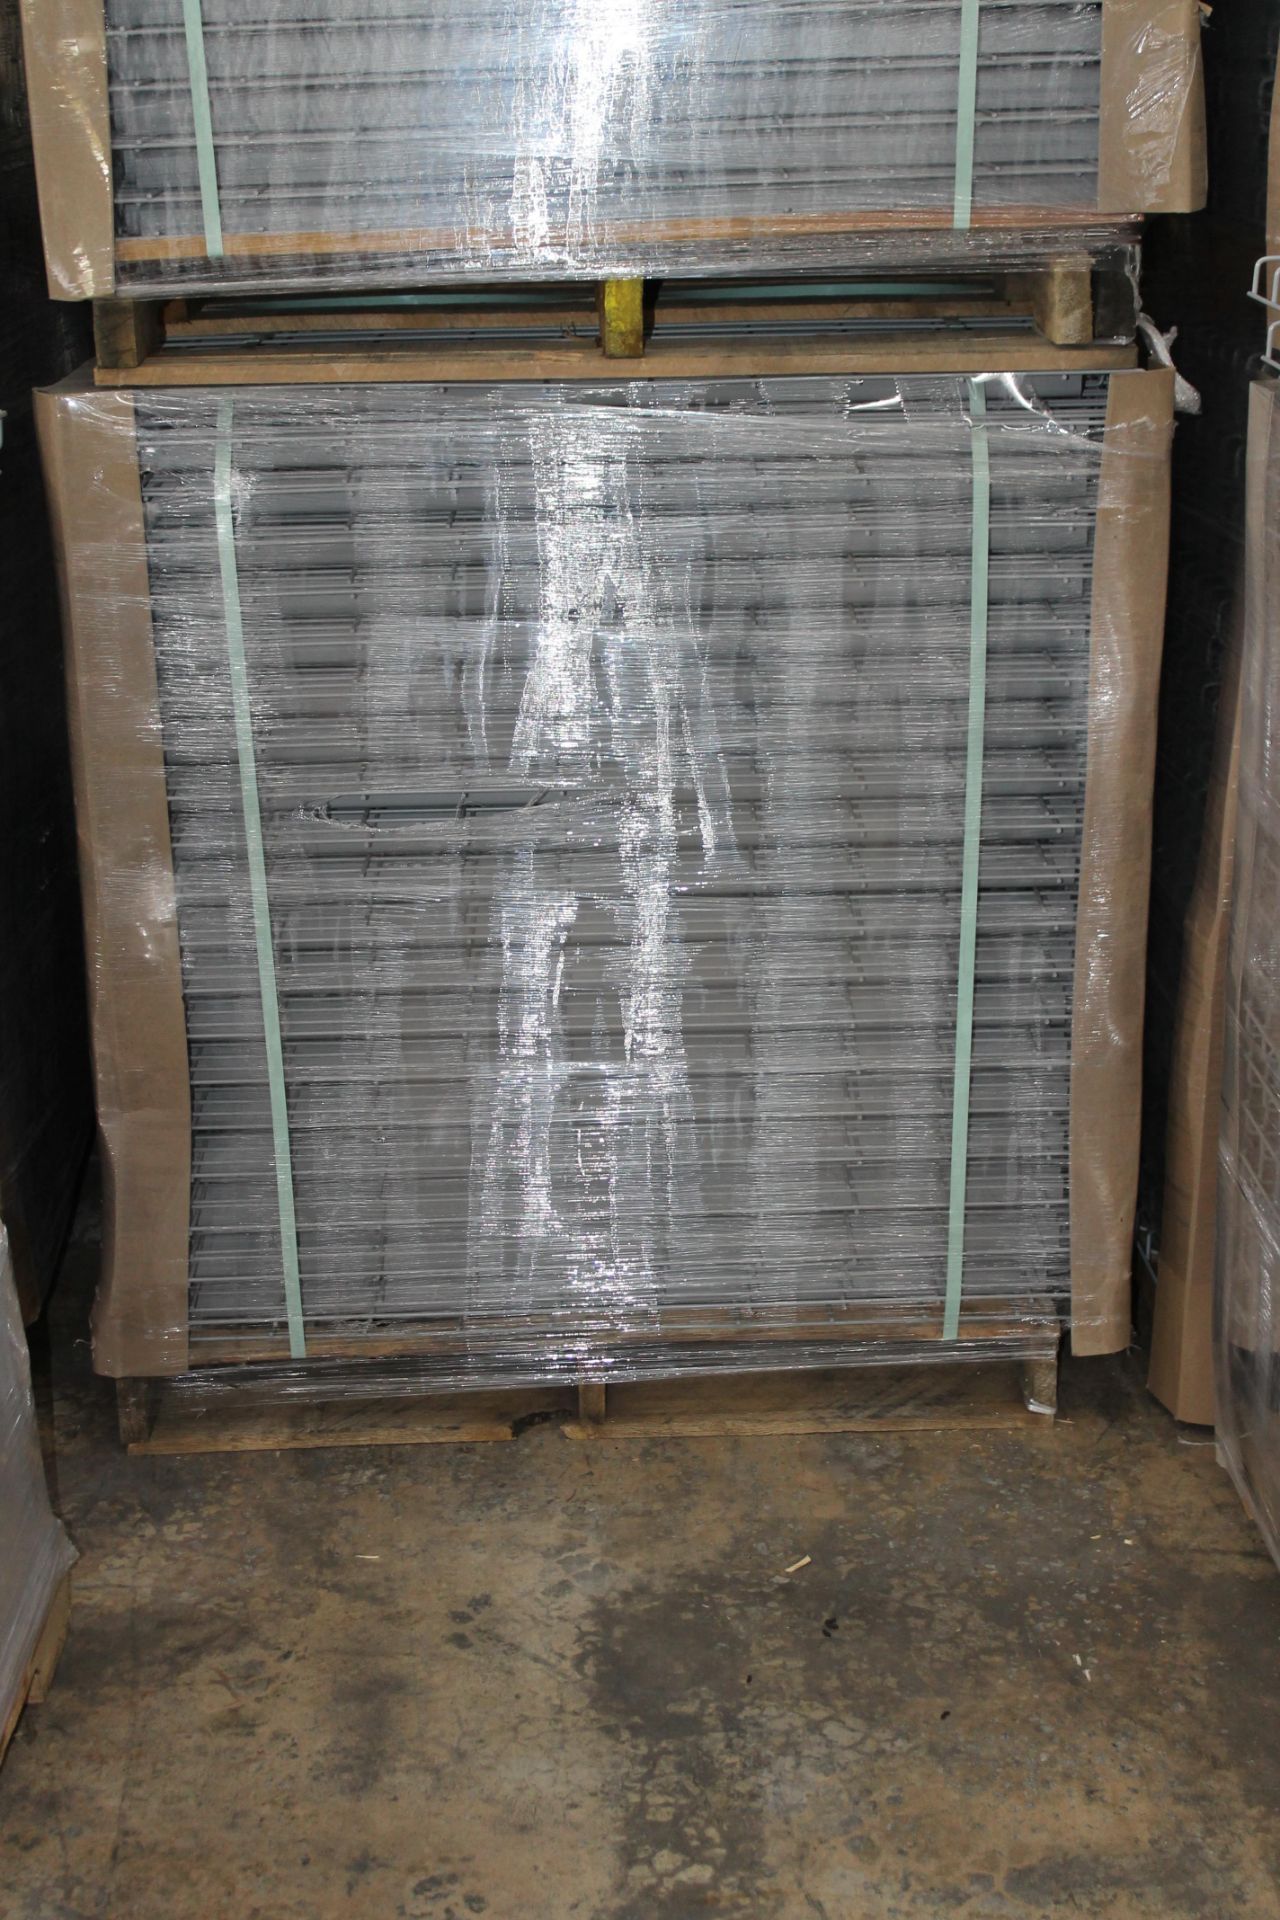 NEW 40 PCS OF STANDARD 44" X 46" WIREDECK - 2500 LBS CAPACITY - Image 2 of 2